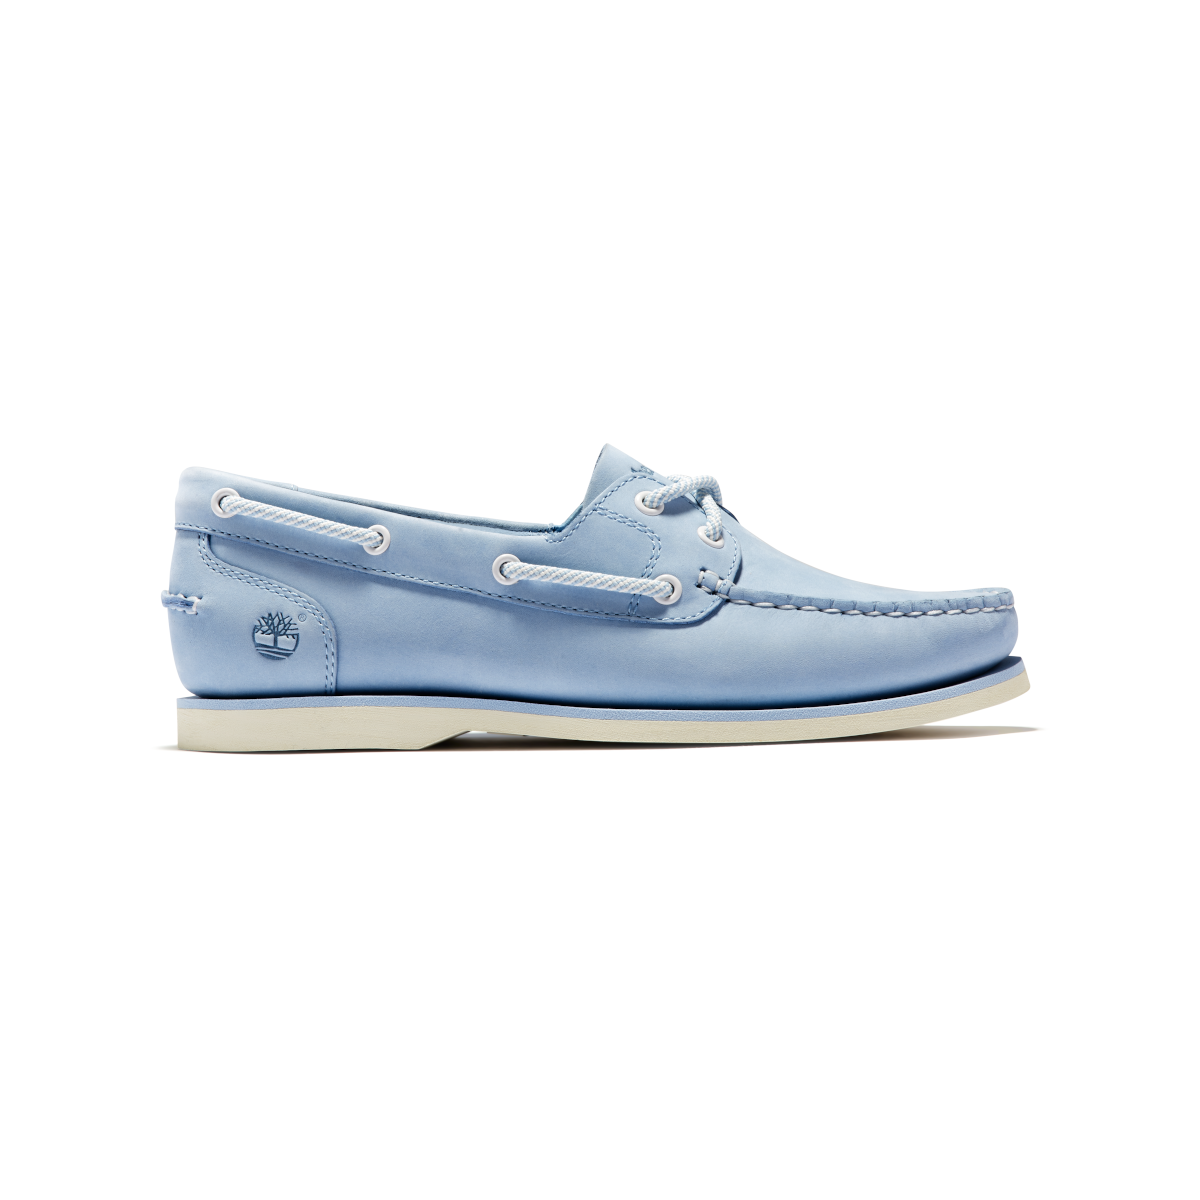 Timberland Classic Boat Unlined chaussures bateau femme bleu clair, taille 38,5